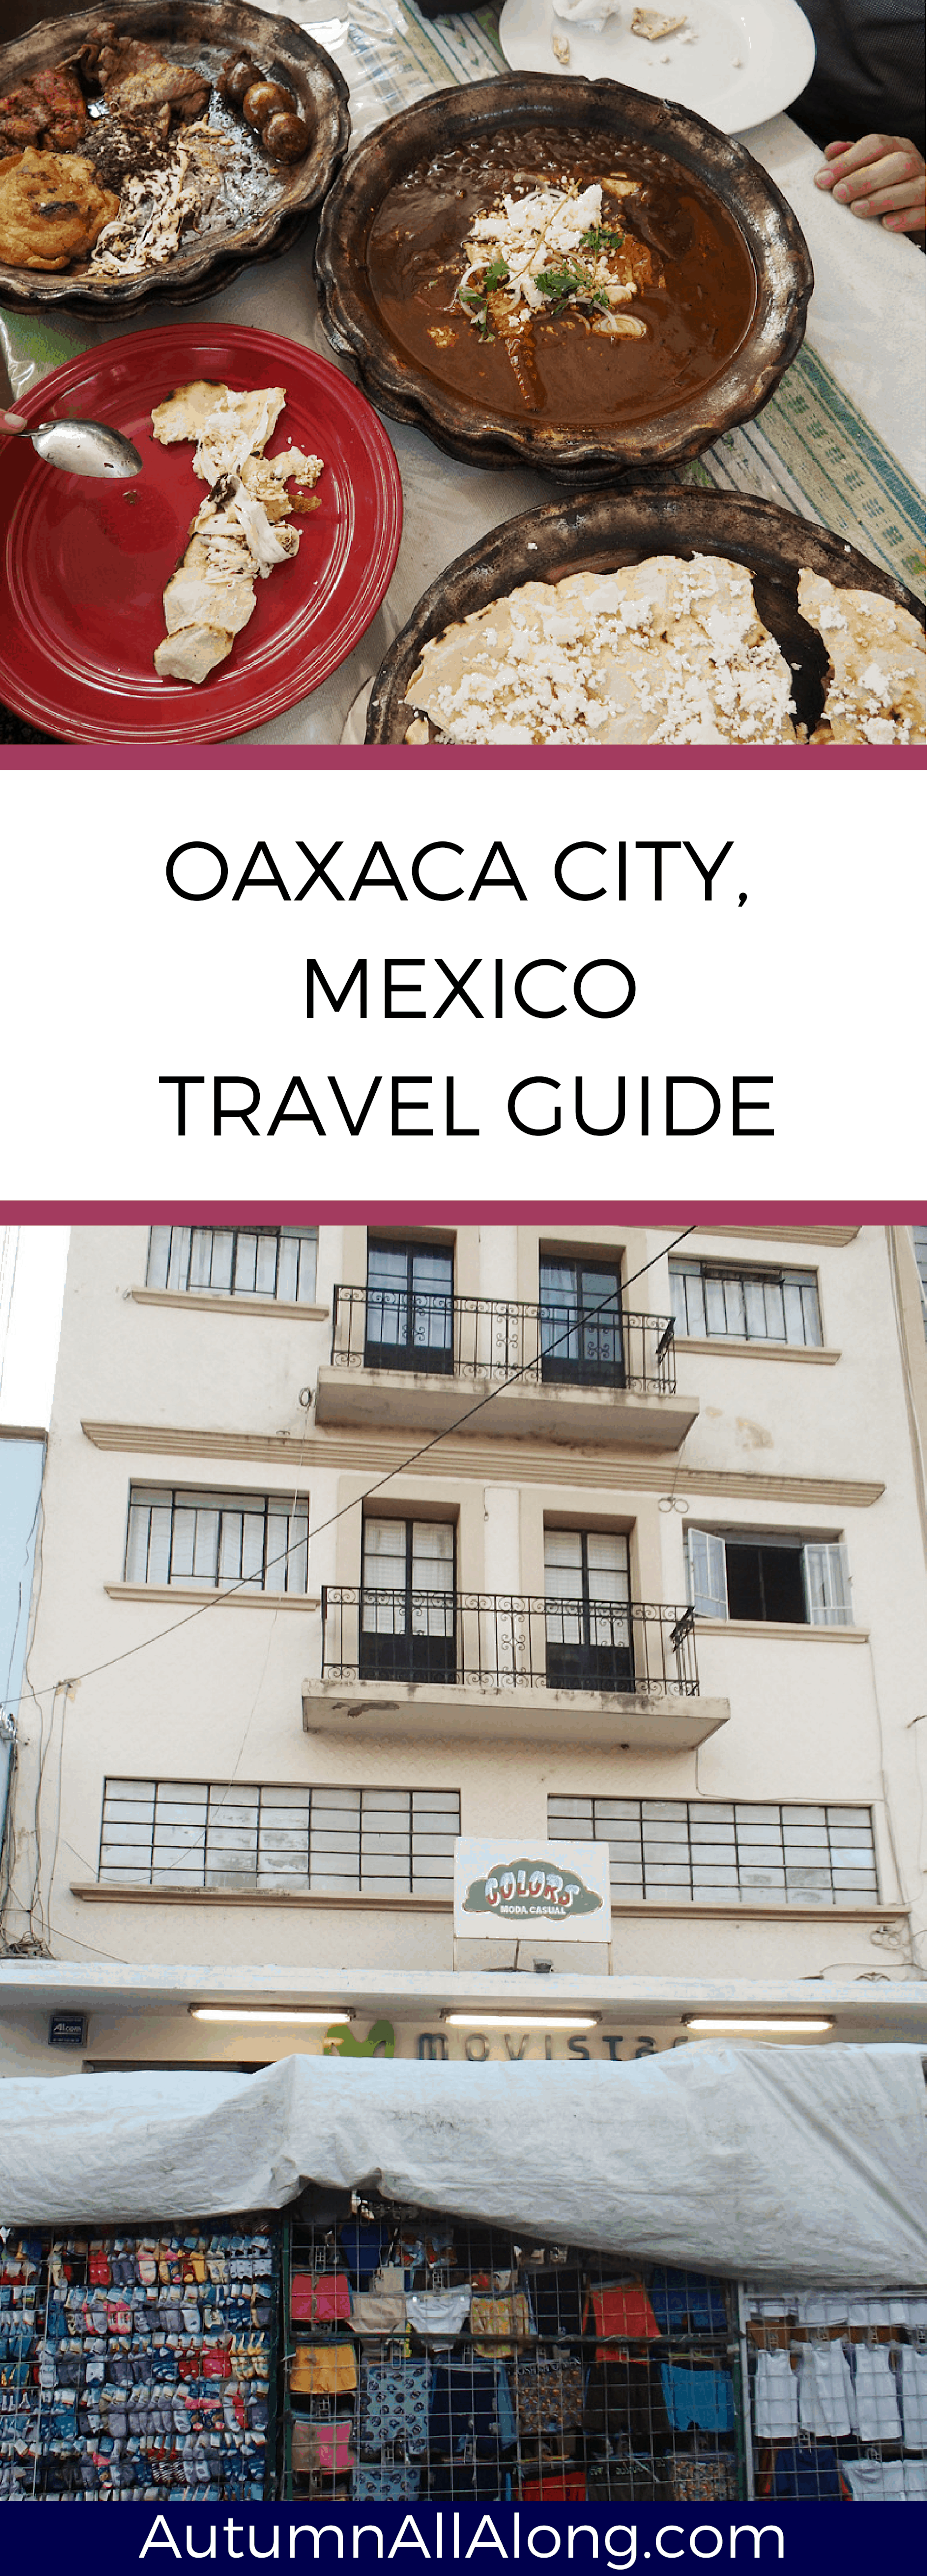 Oaxaca City, Mexico is the indigenous cultural center of Mexico. The architecture was beautiful, the food was excellent, and it is definitely a place to revisit! | via Autumn All Along